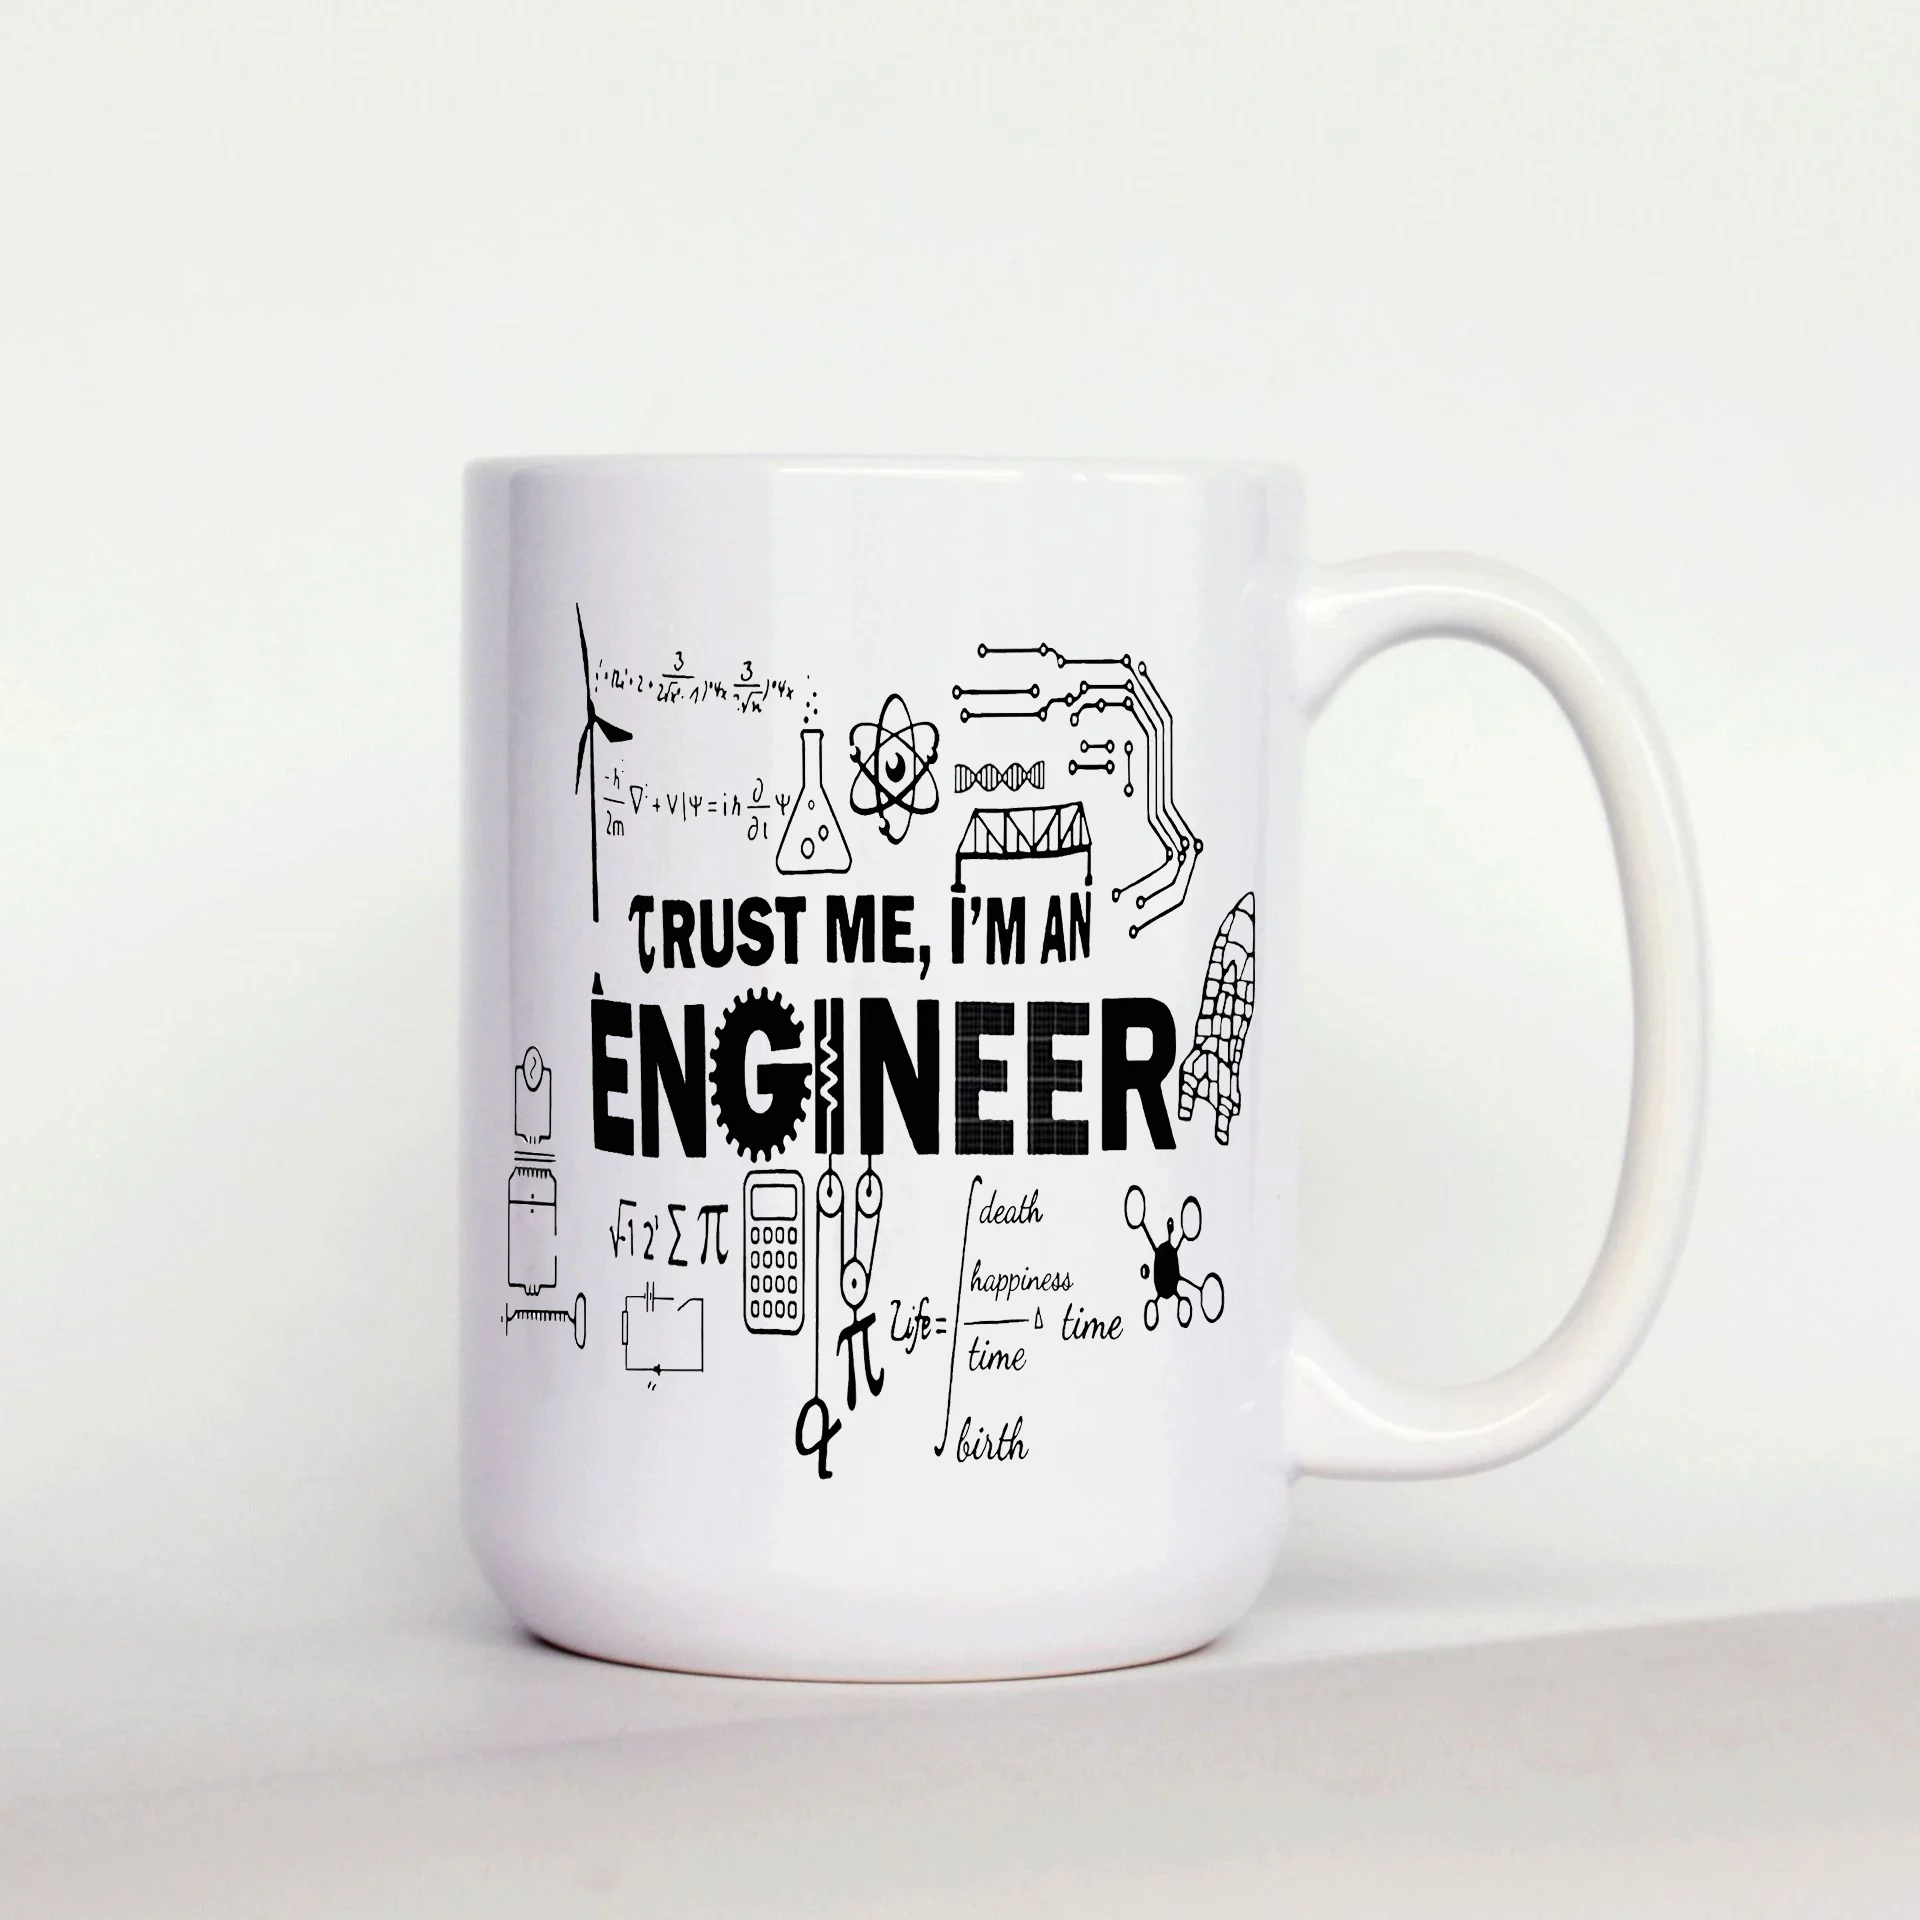 

Engineer Cups 15OZ Pottery Coffee Mugs Large Ceramic Teaware Novelty Funny Beer Mugs for Men Unique Design Tea Cups with Handles